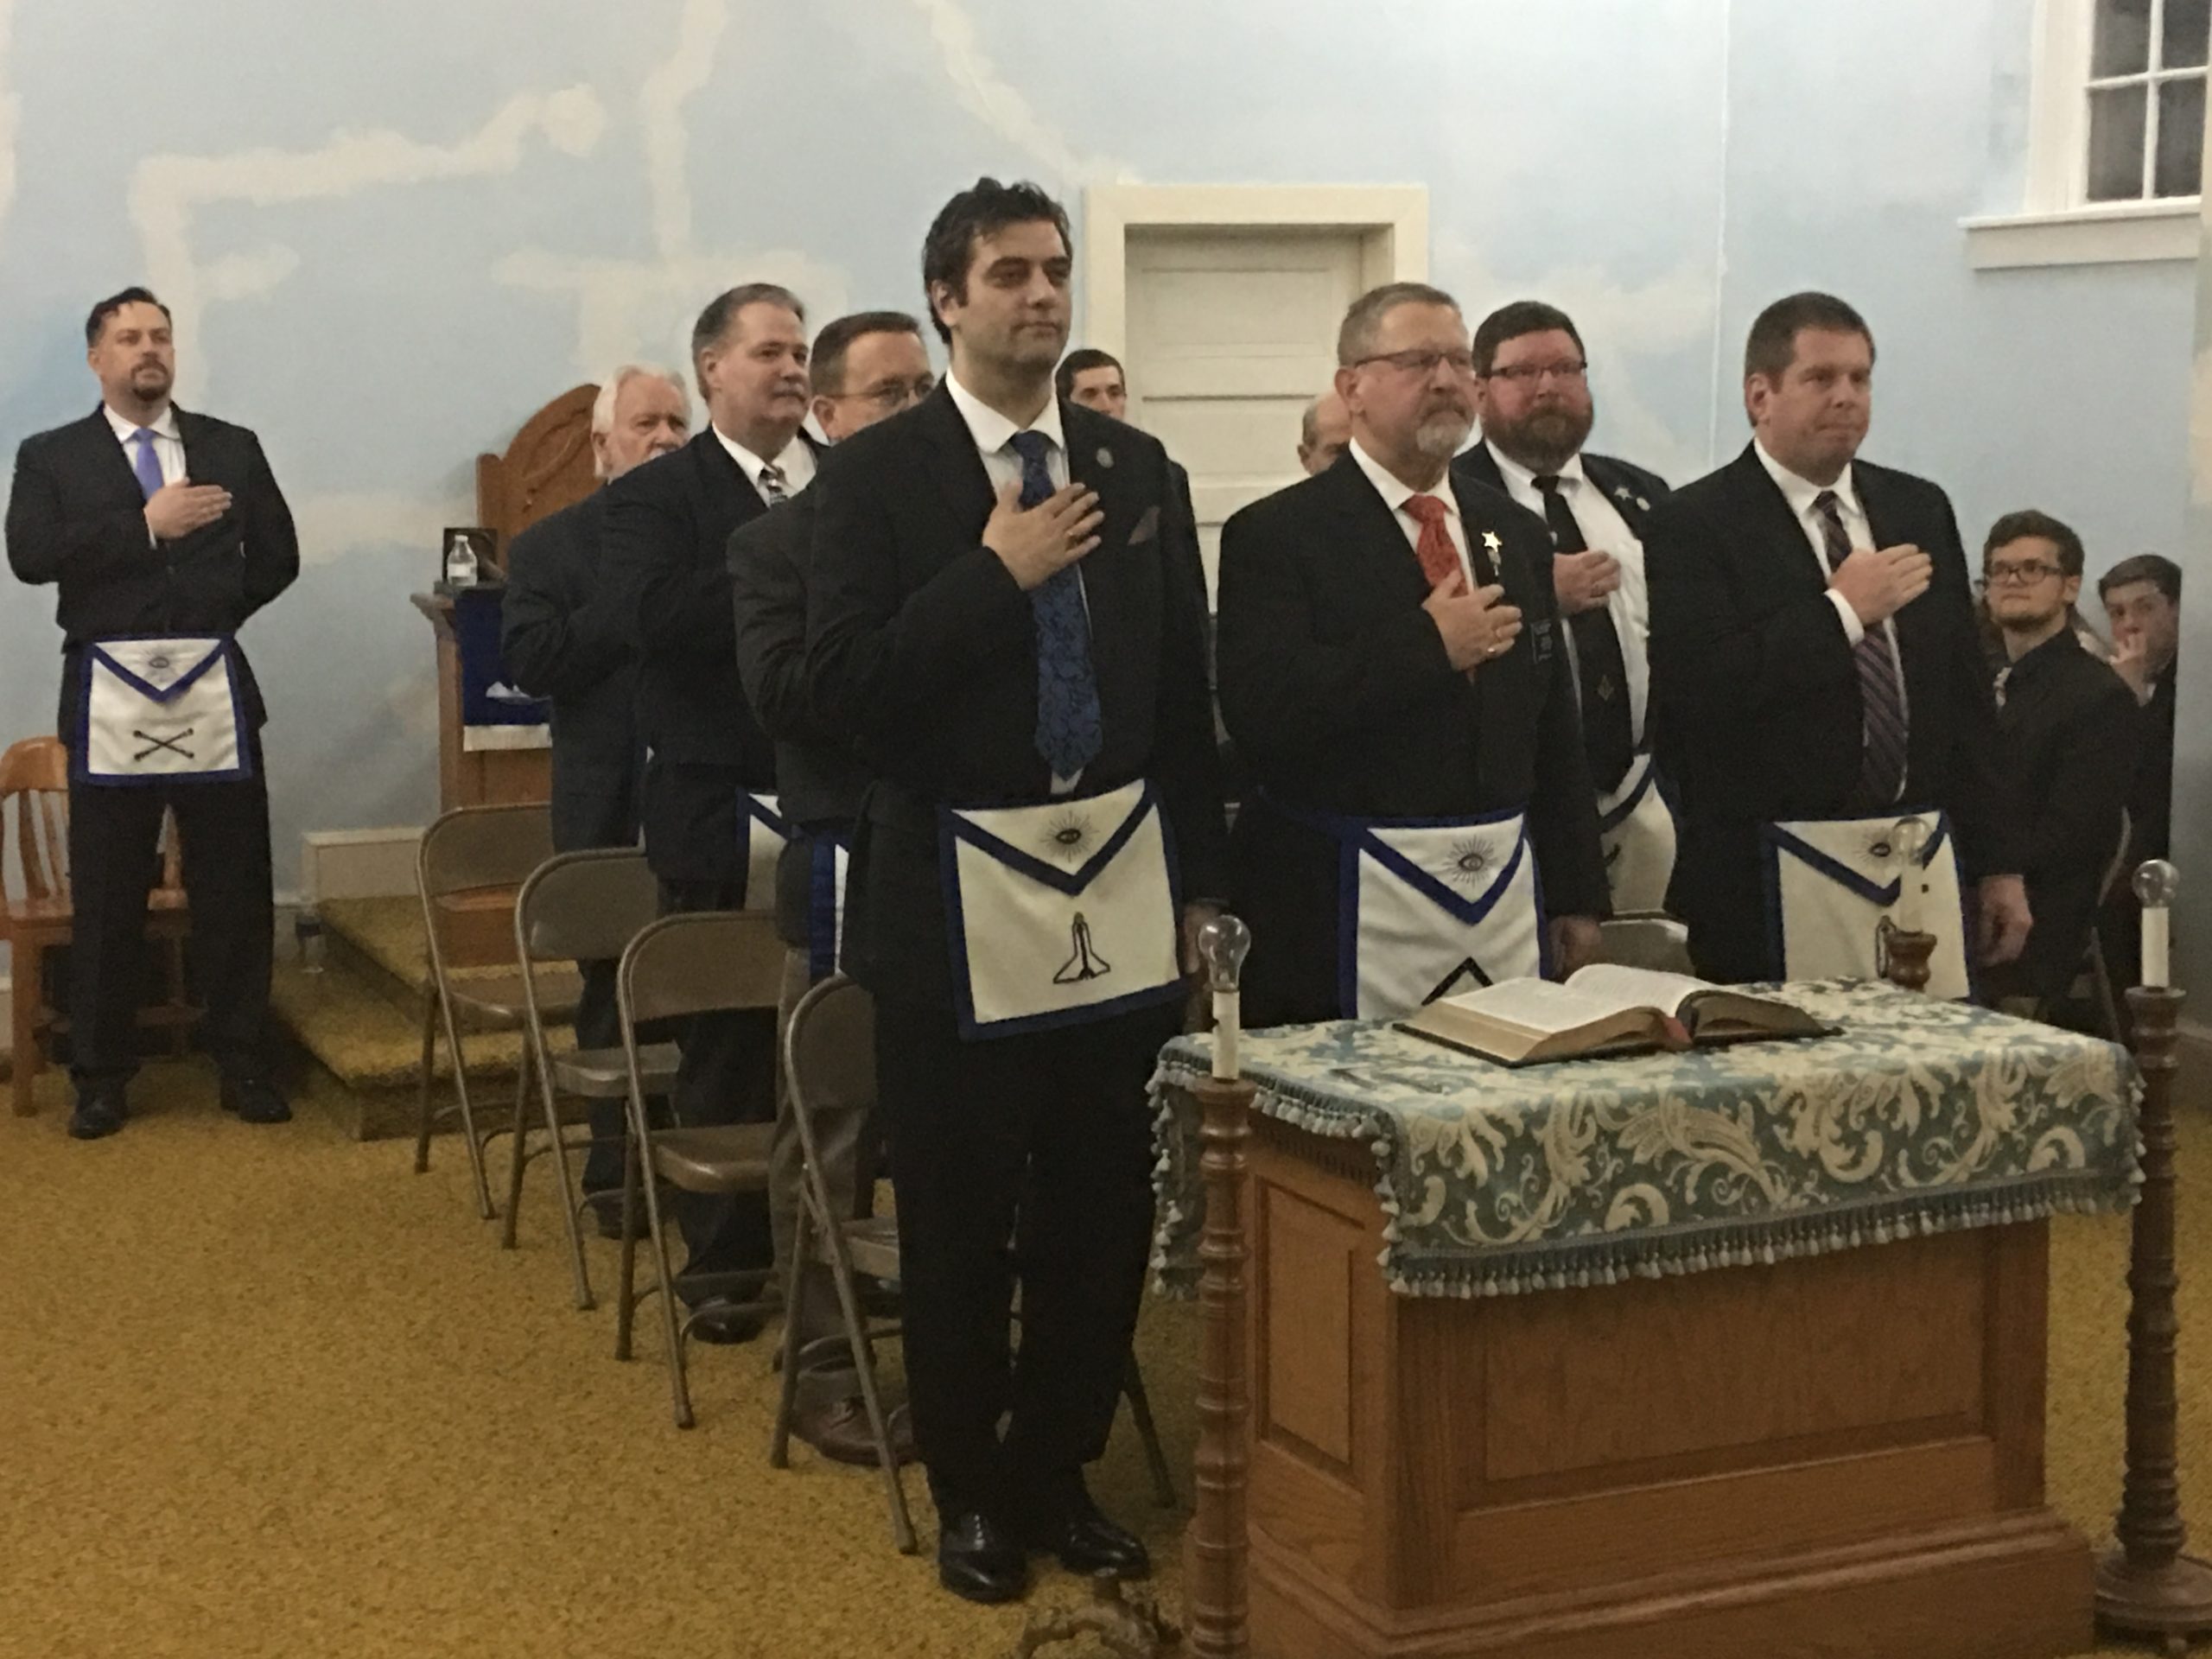 2018 Installation of Officers